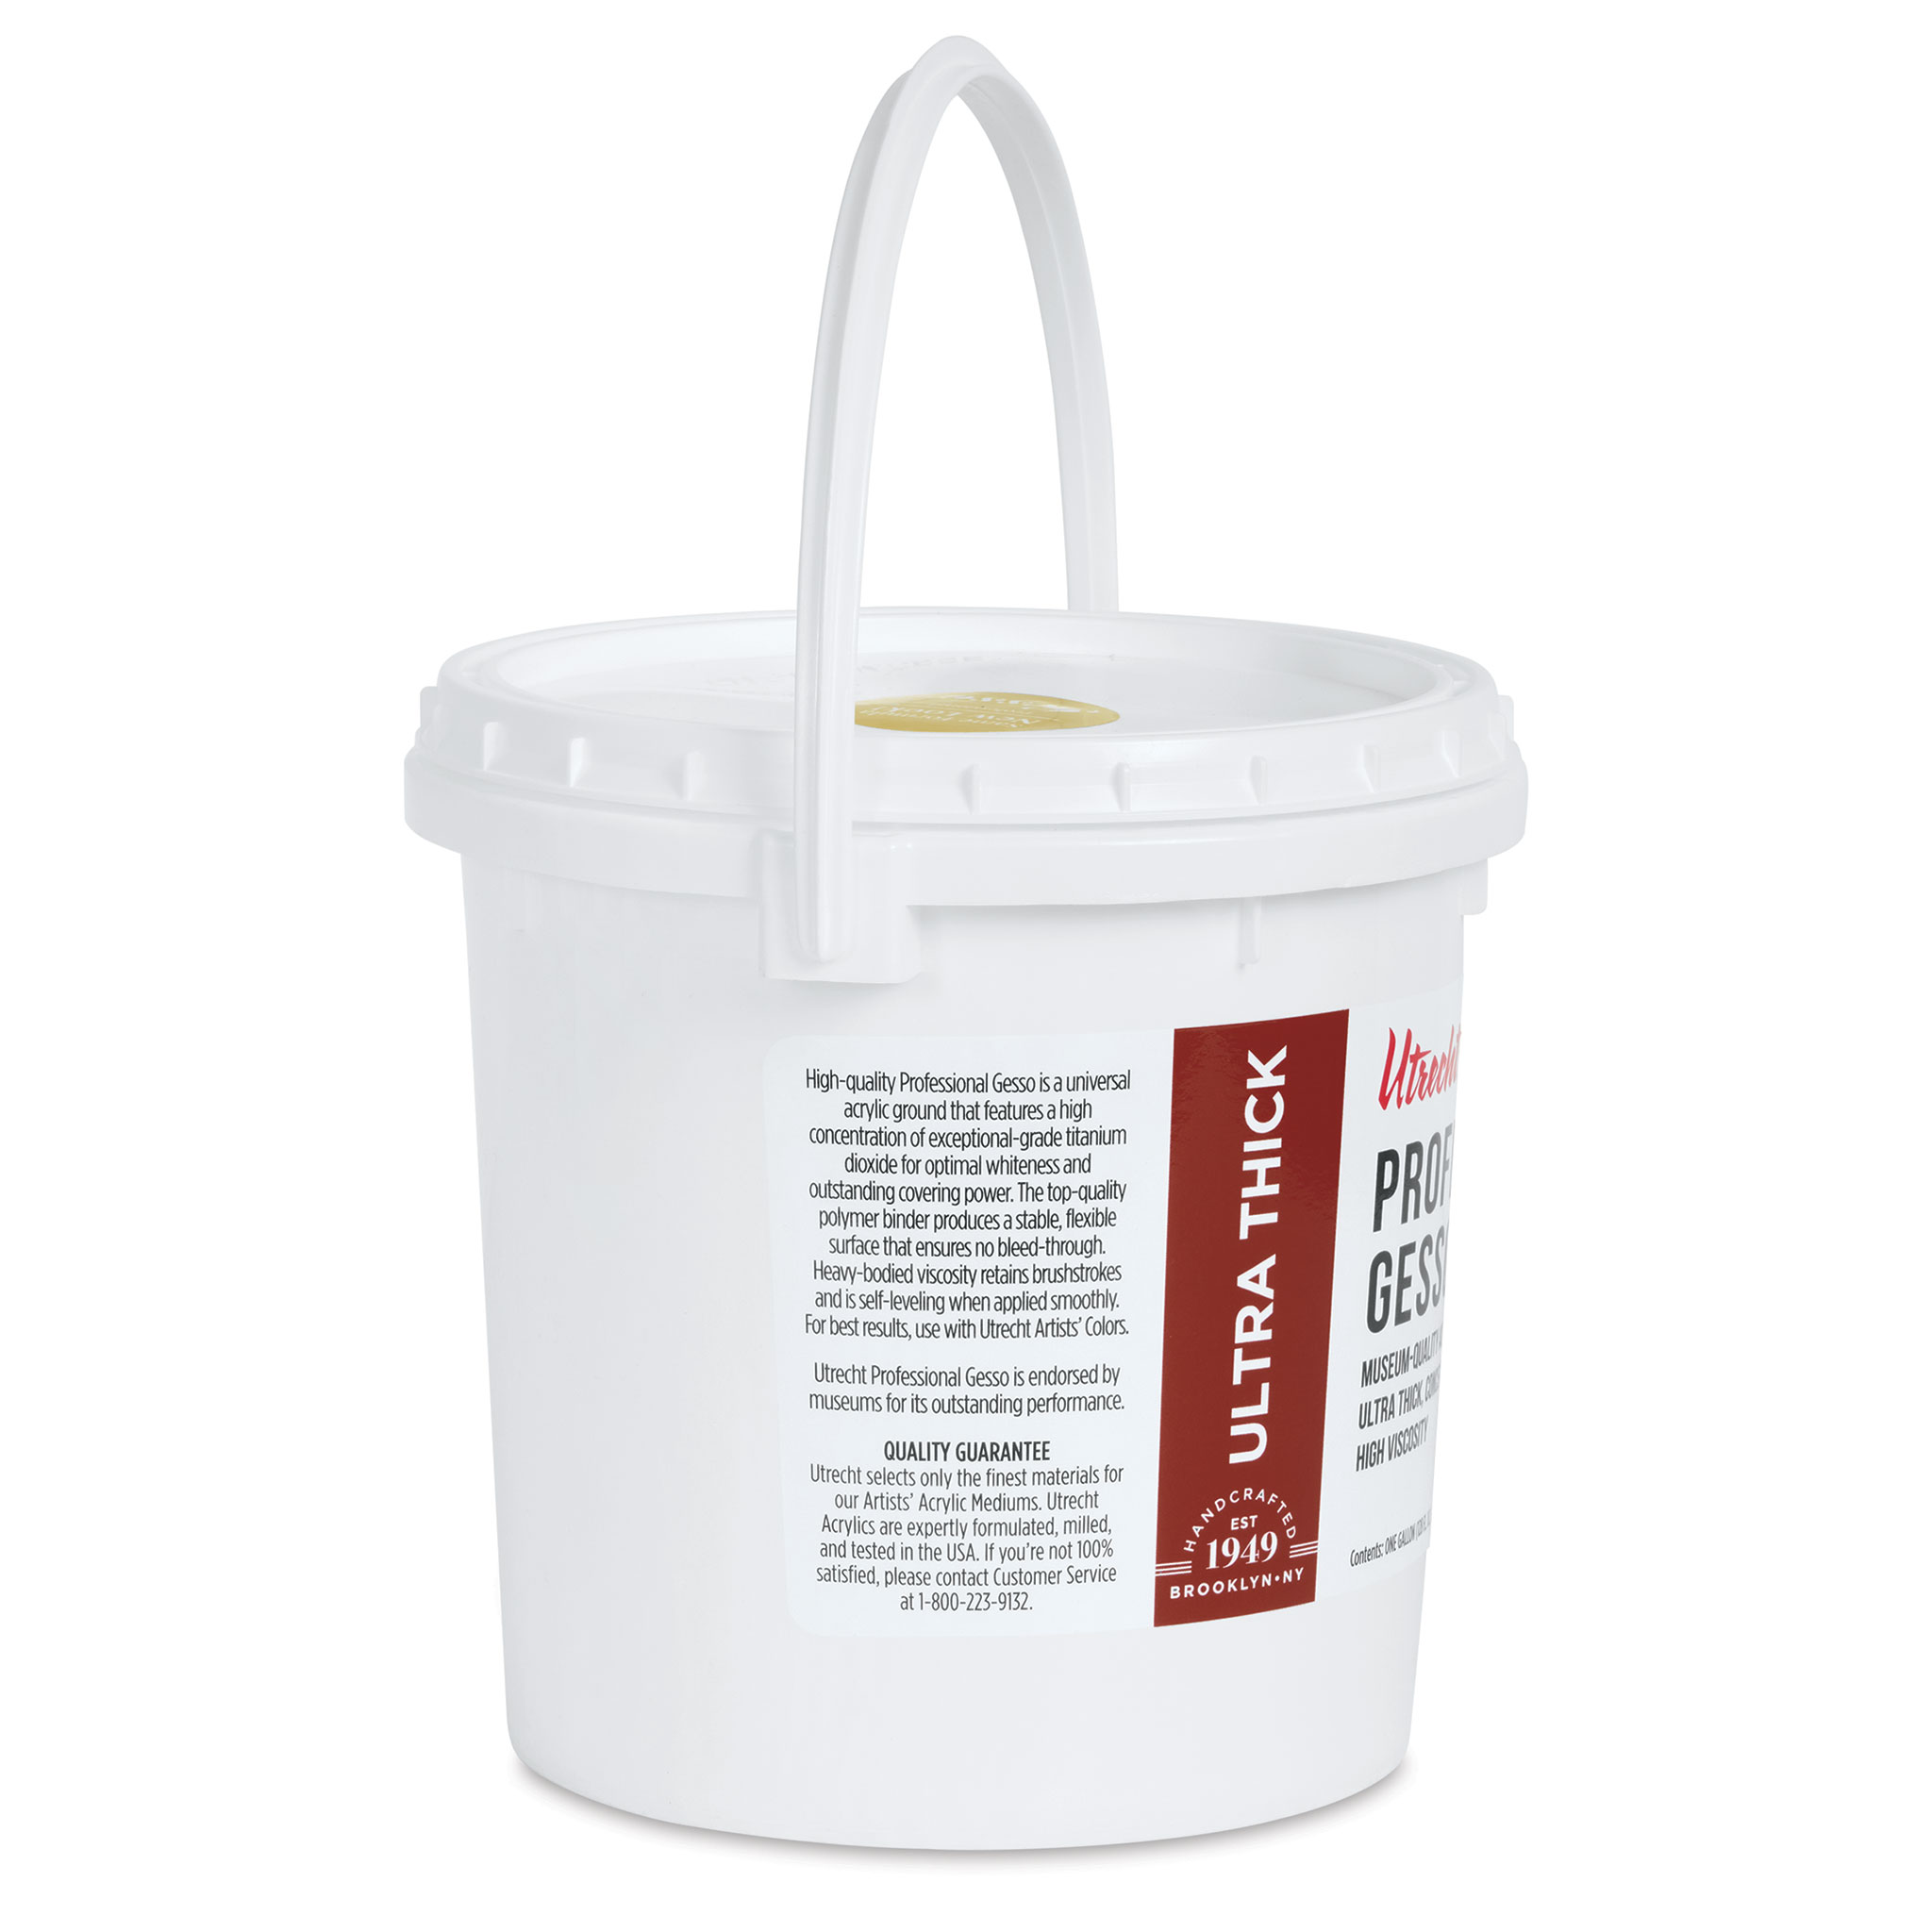 New York Central Acrylic Gesso - White Professional Grade Gesso for  Painting, Acrylic, Oil, Pastels, & More! - 8 oz Bottle